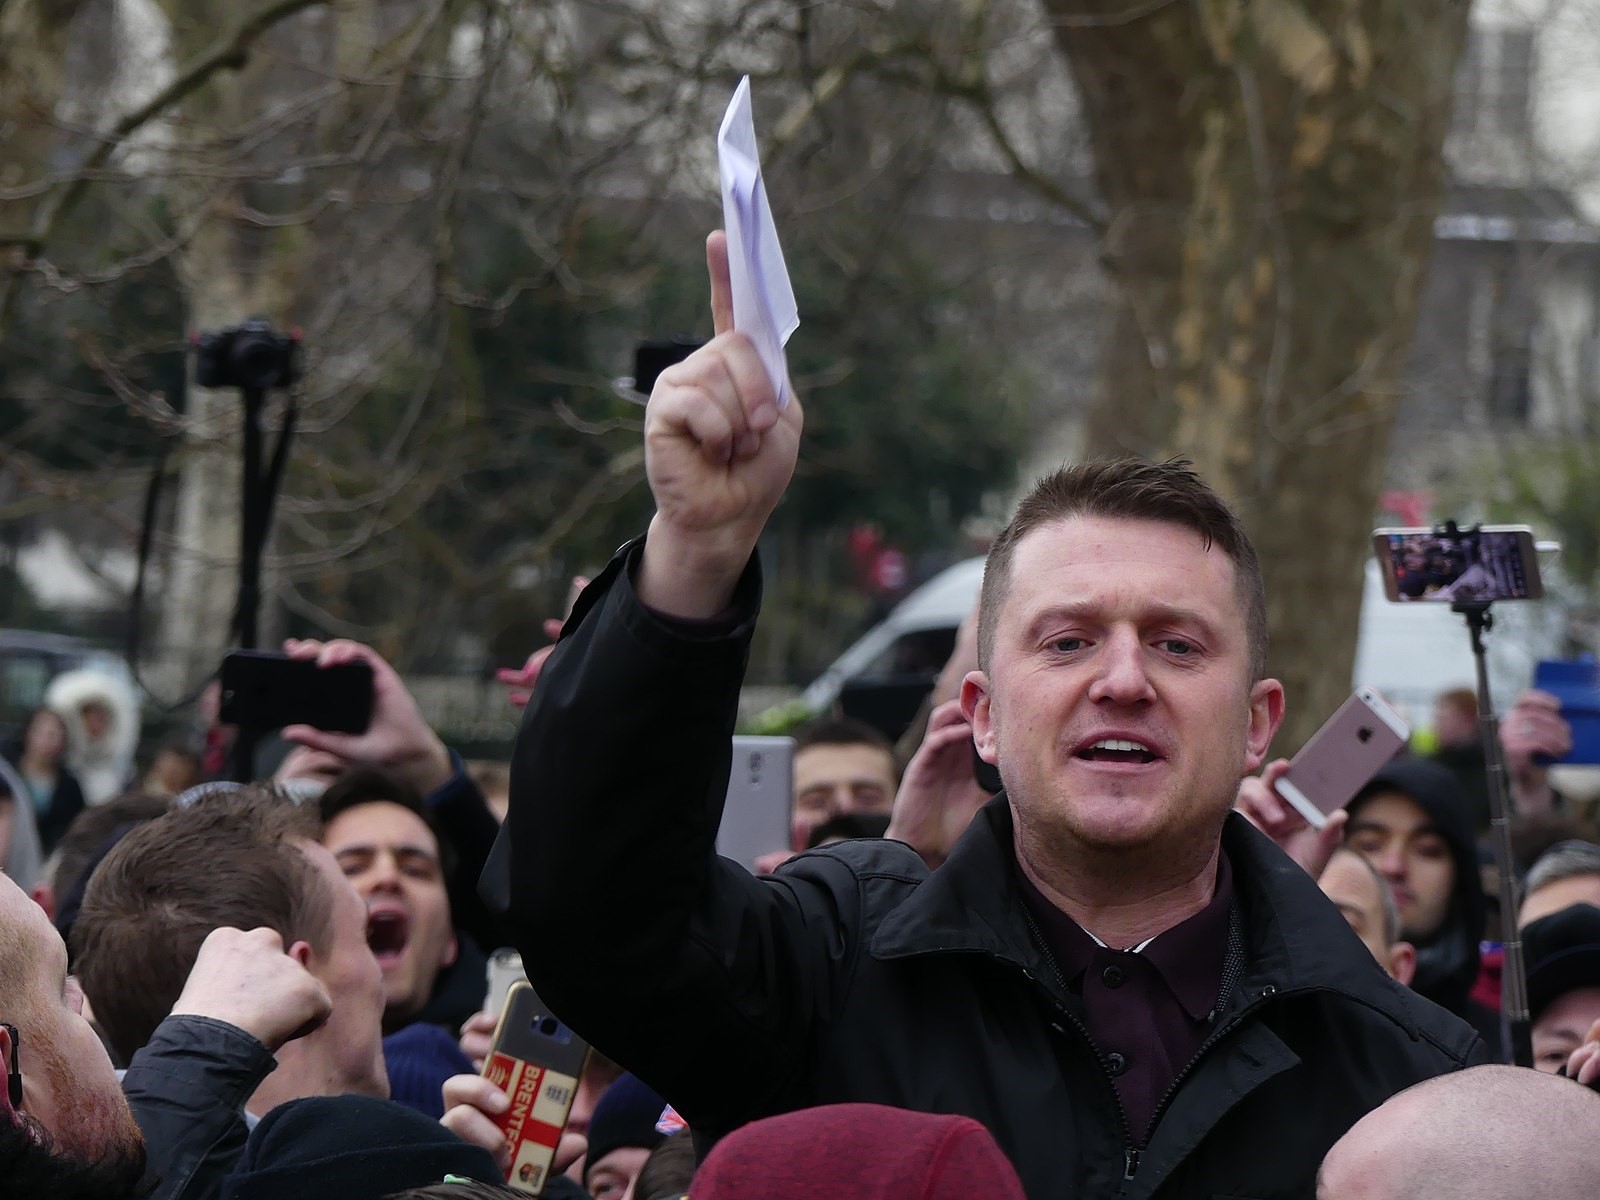 A picture of right-wing activist and politician Tommy Robinsonstanding amongst a crowd of people, many of whom are using their phones to film/take pictures of him